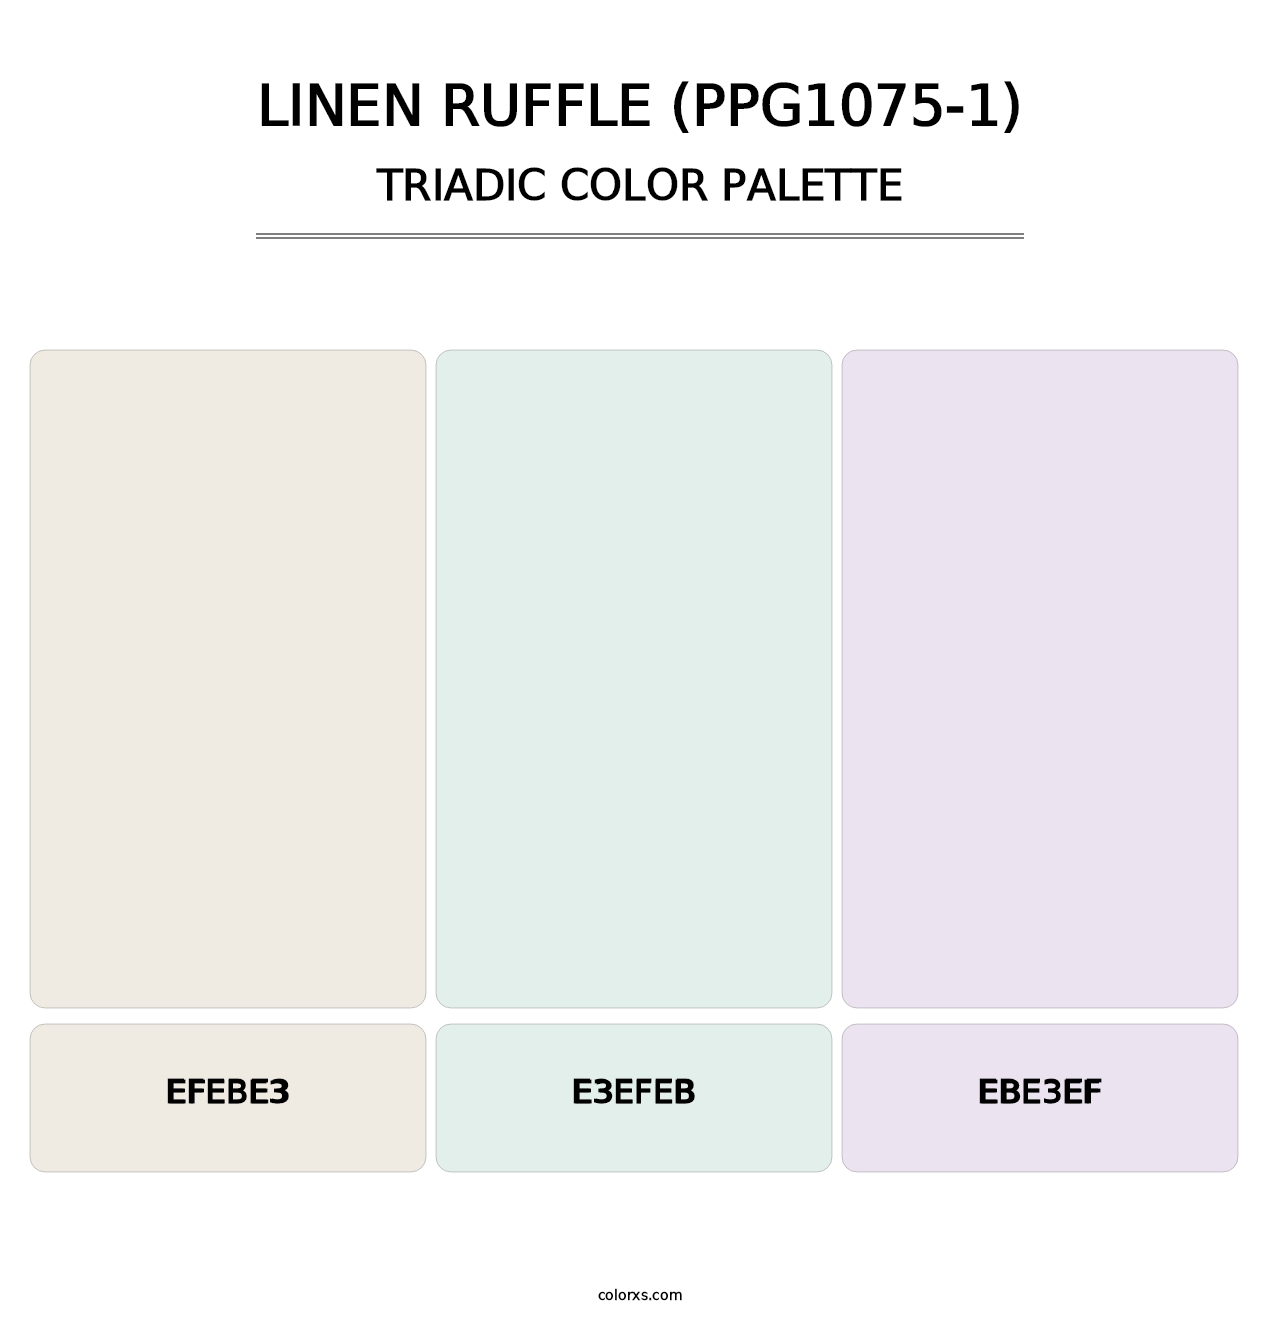 Linen Ruffle (PPG1075-1) - Triadic Color Palette